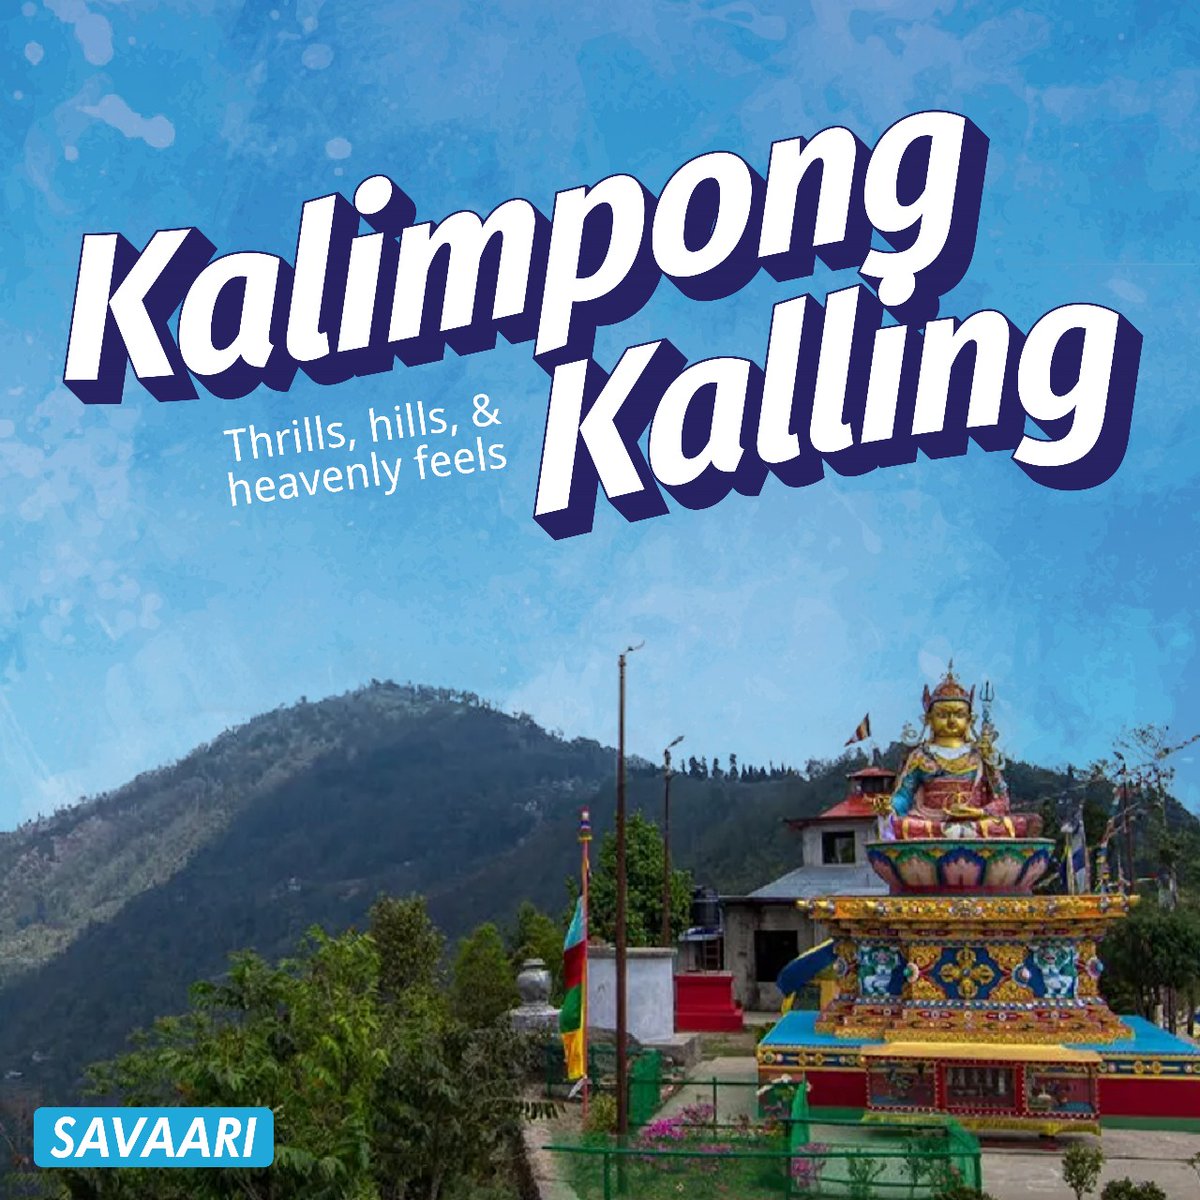 Feeling the heat?  Kalimpong in #WestBengal is calling!  Escape the scorching temperatures and immerse yourself in the serene beauty of this charming hill station. #Kalimpong #SummerEscape